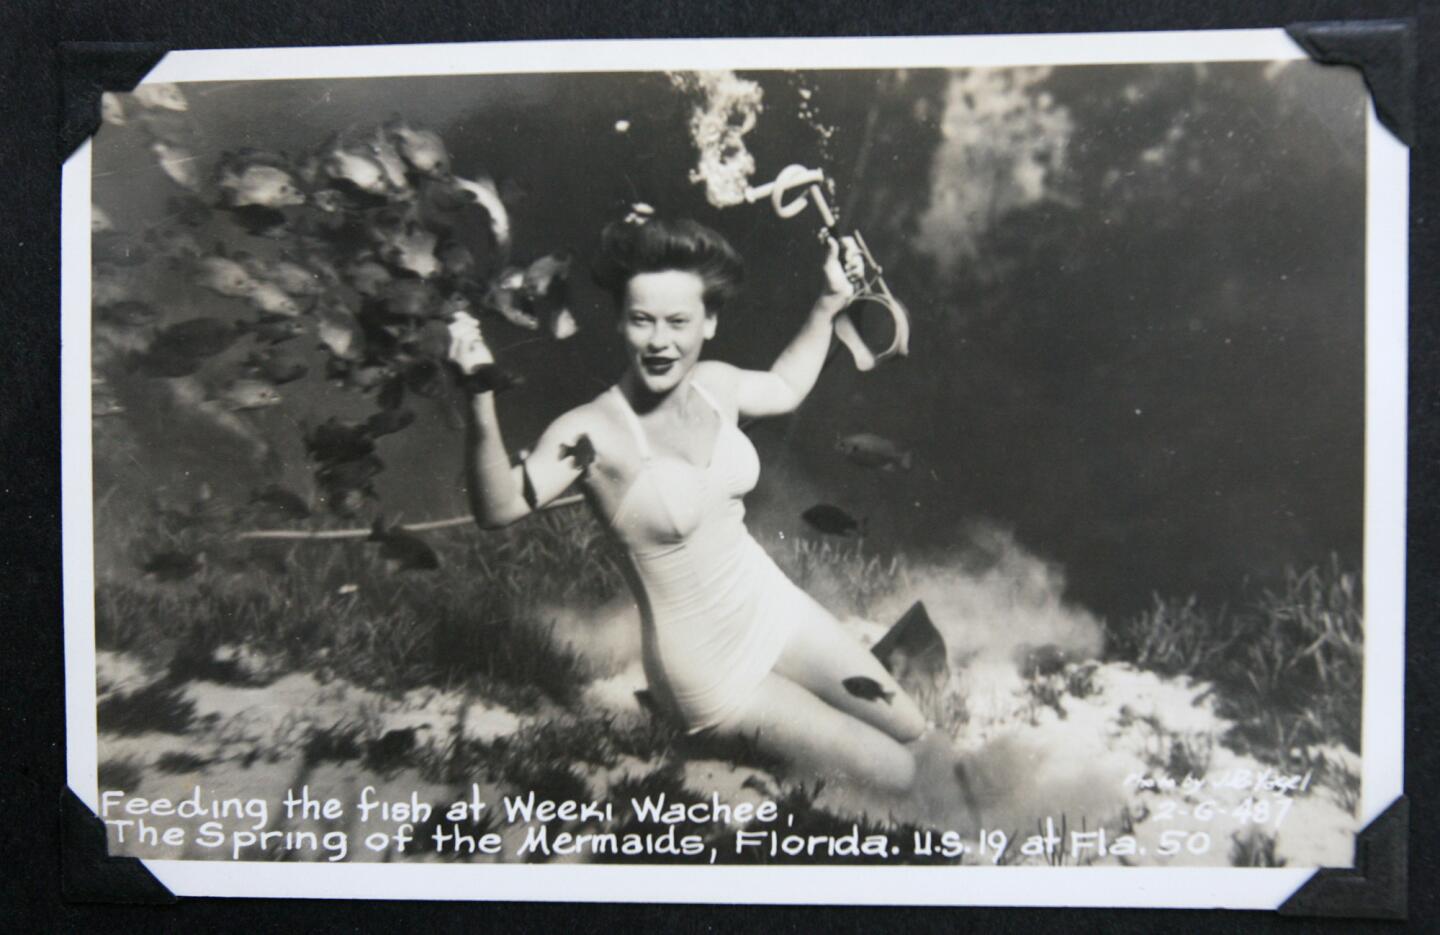 Pictures: Historical photos of Florida's springs